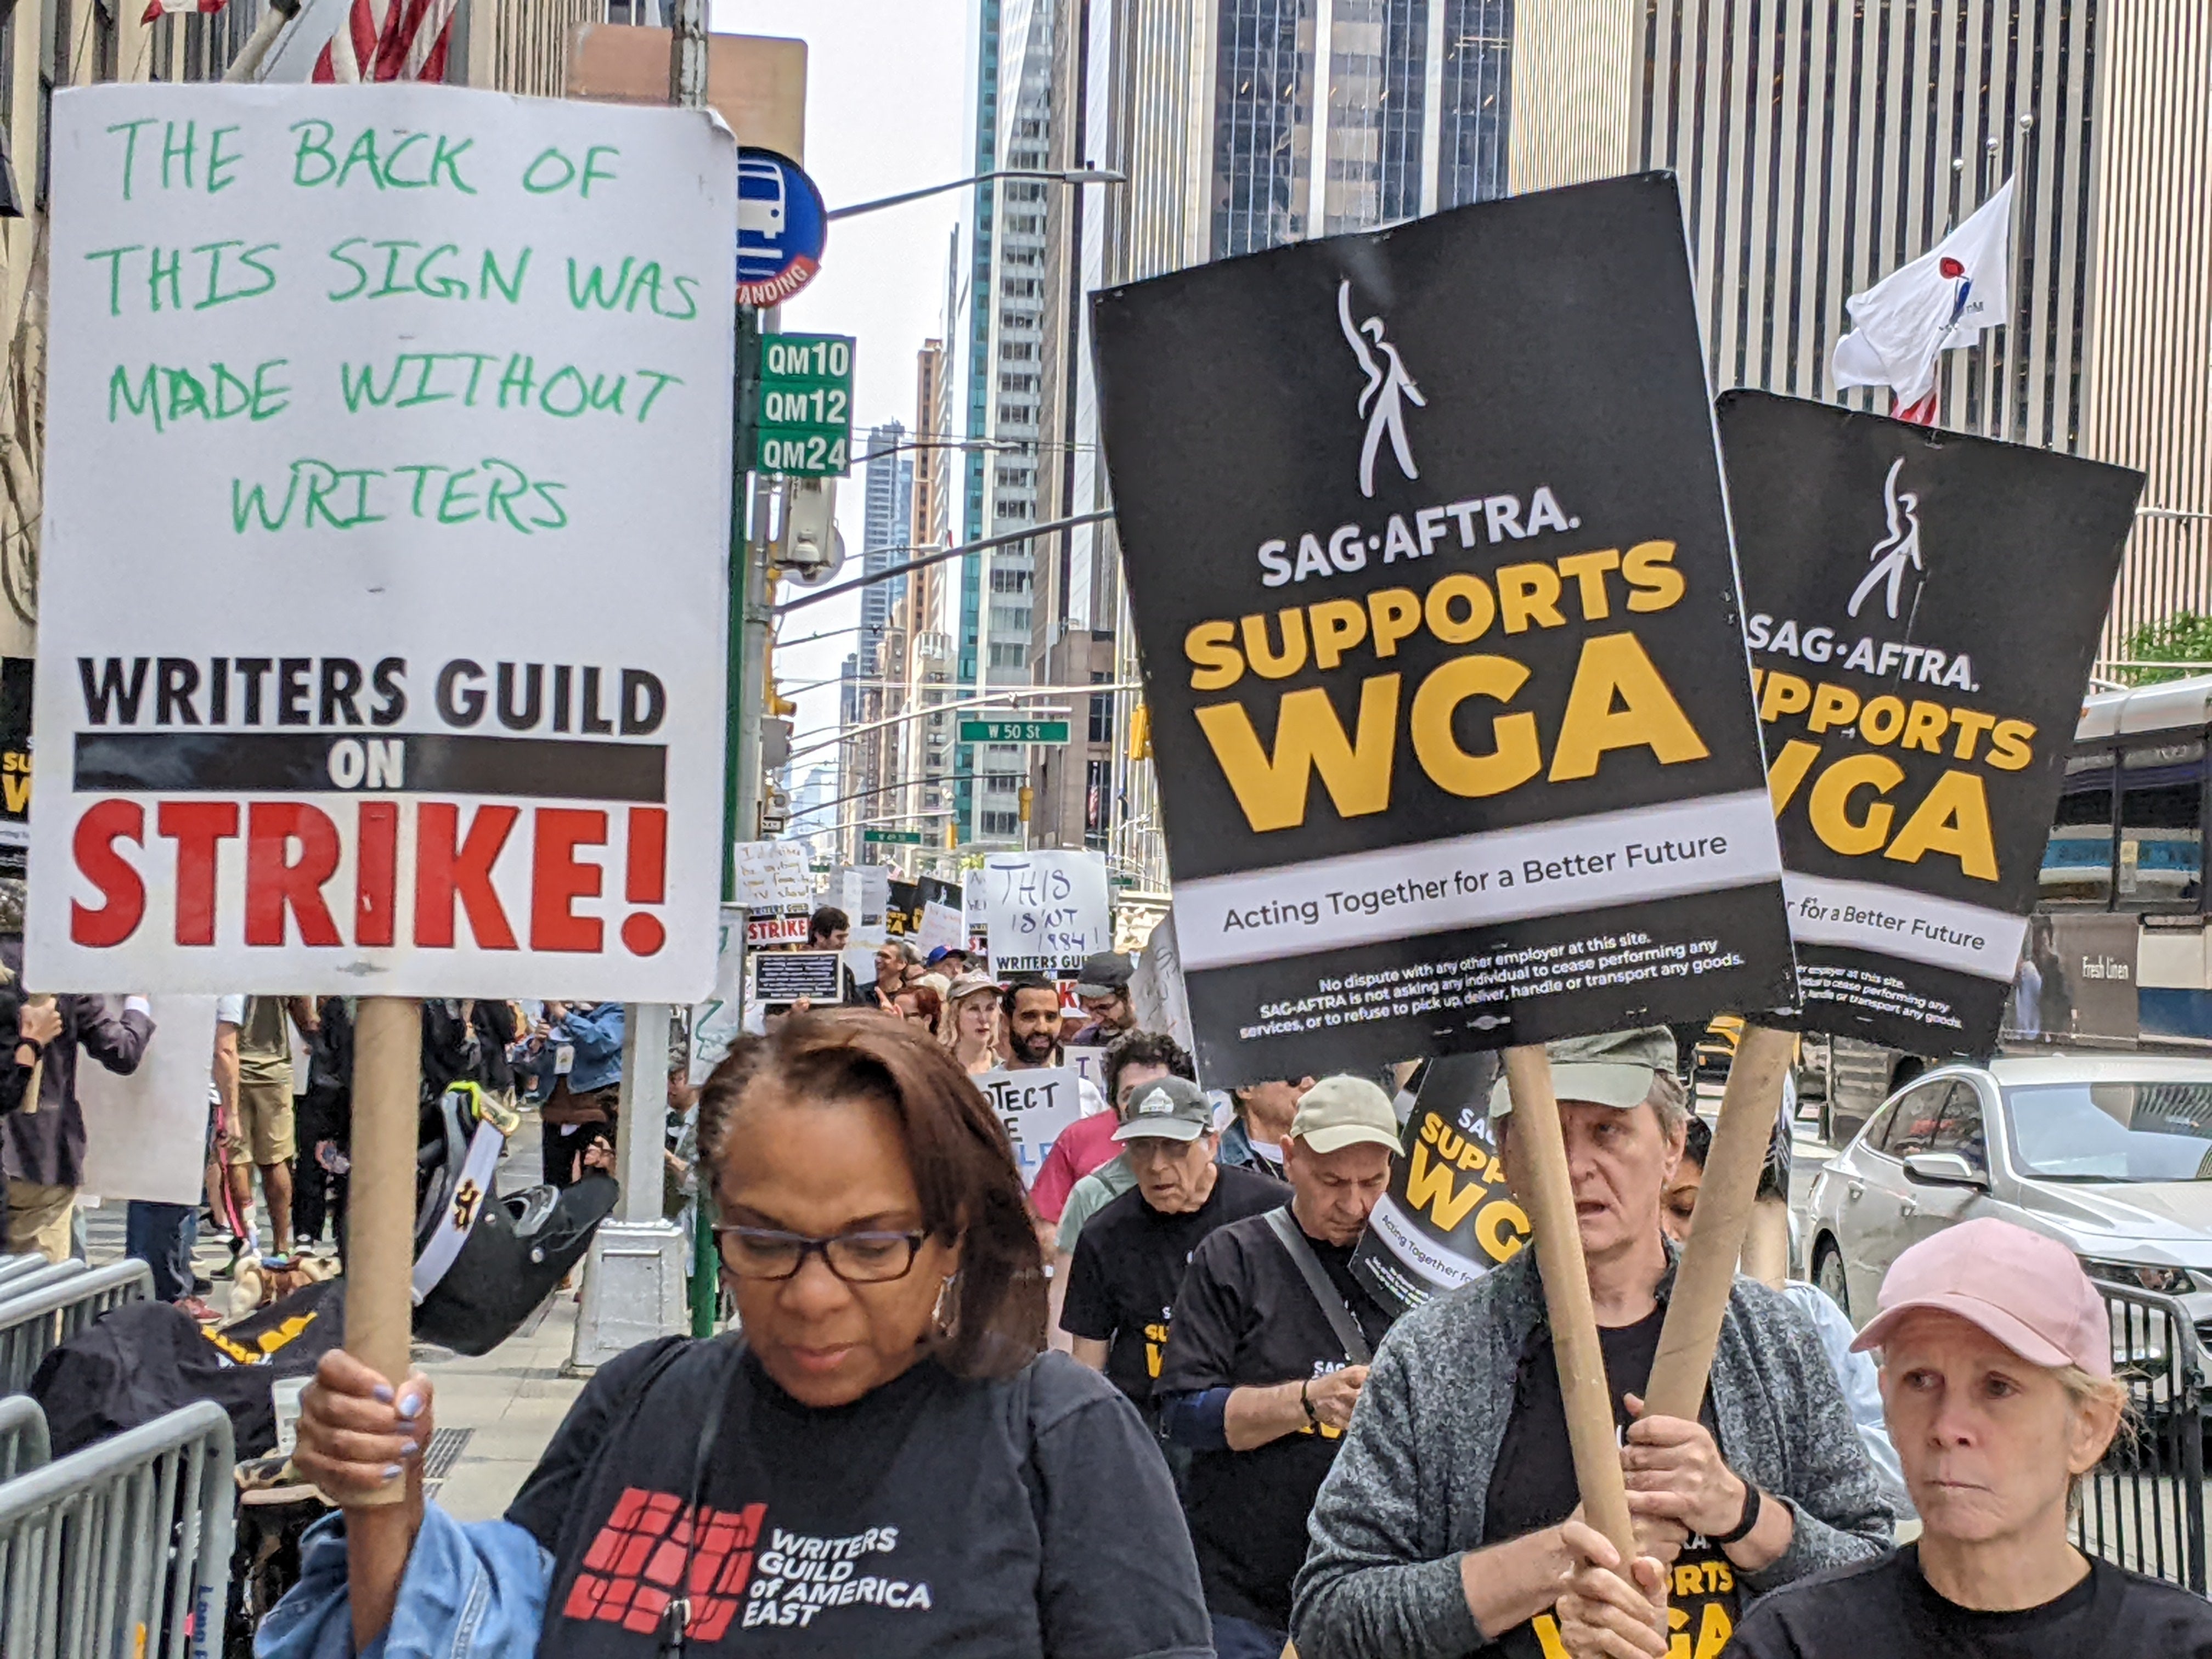 SAG-AFTRA members picketed outside of Radio City Music Hall in Manhattan in May to support the WGA in their ongoing strike. SAG-AFTRA has also come out strongly against companies using AI to replace actors. (Photo: Kyle Barr / Gizmodo)